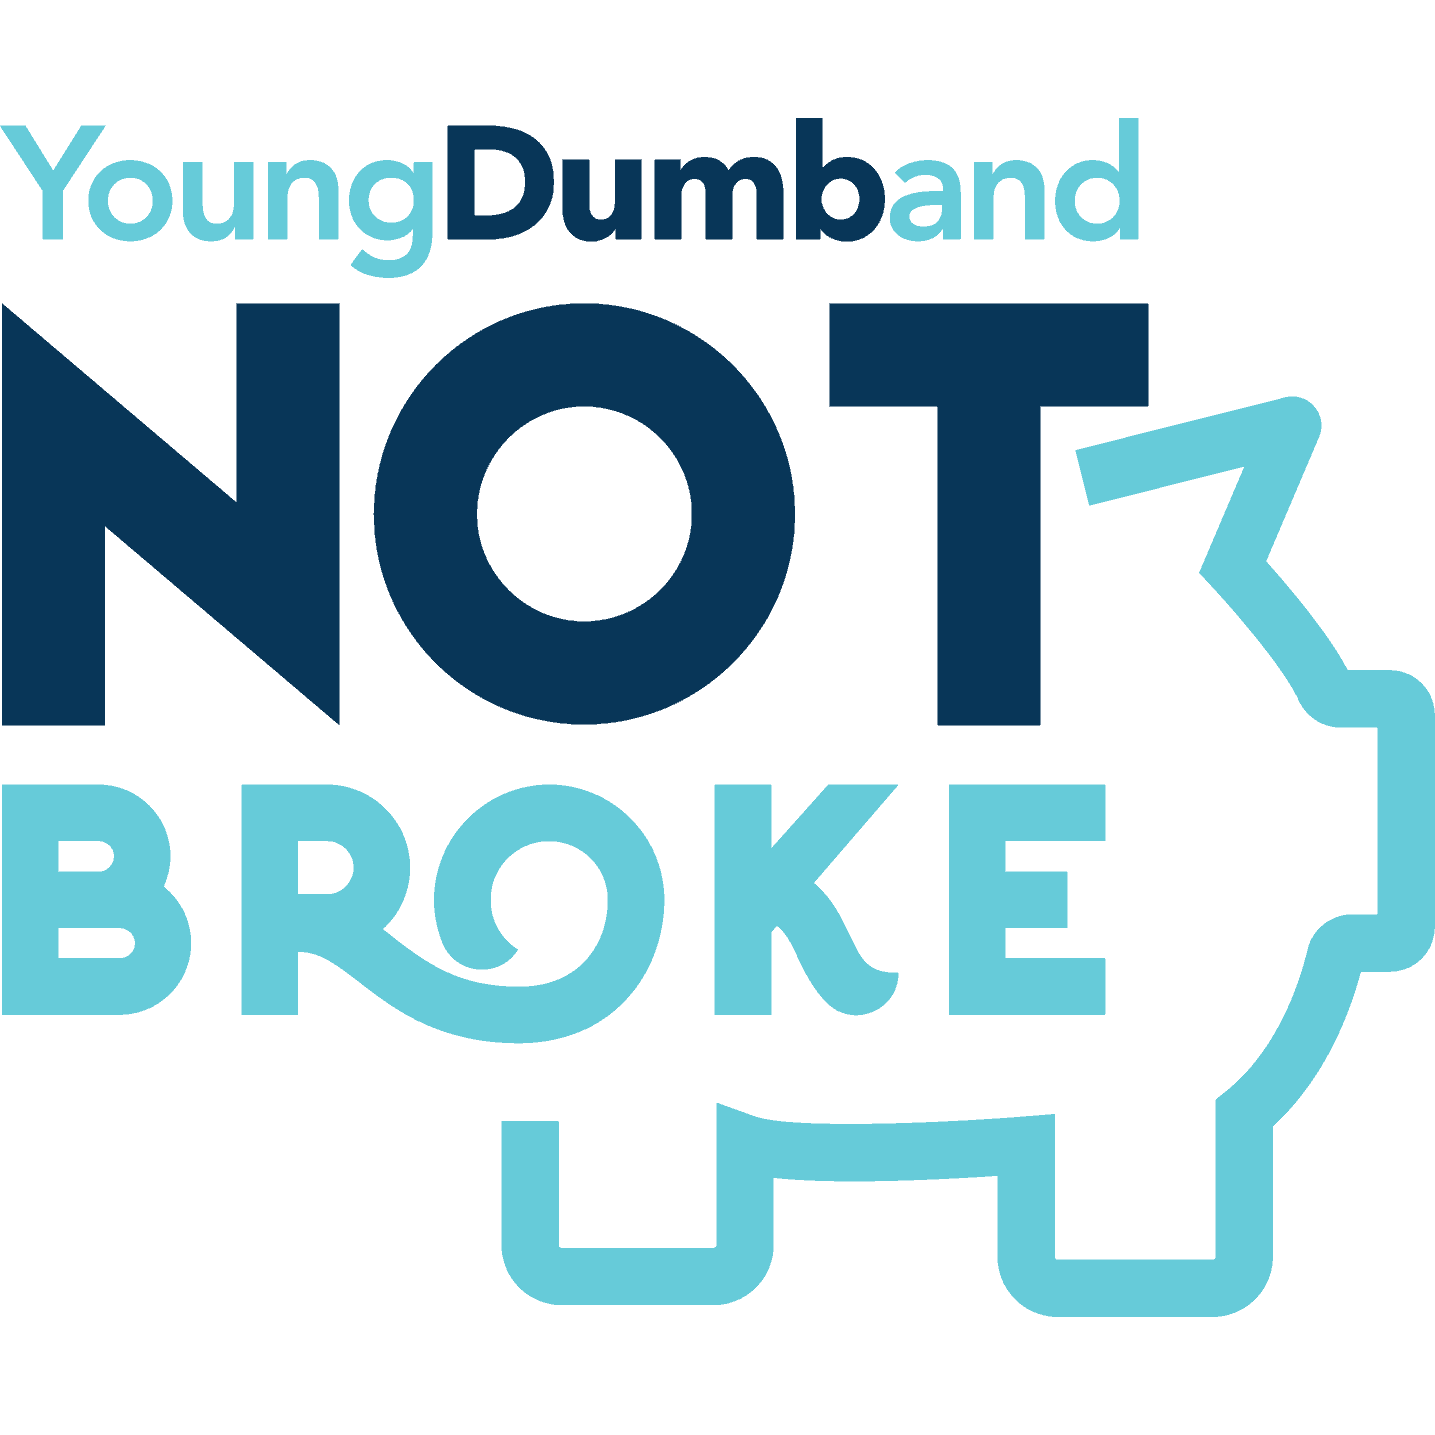 Young, Dumb, and NOT Broke?!